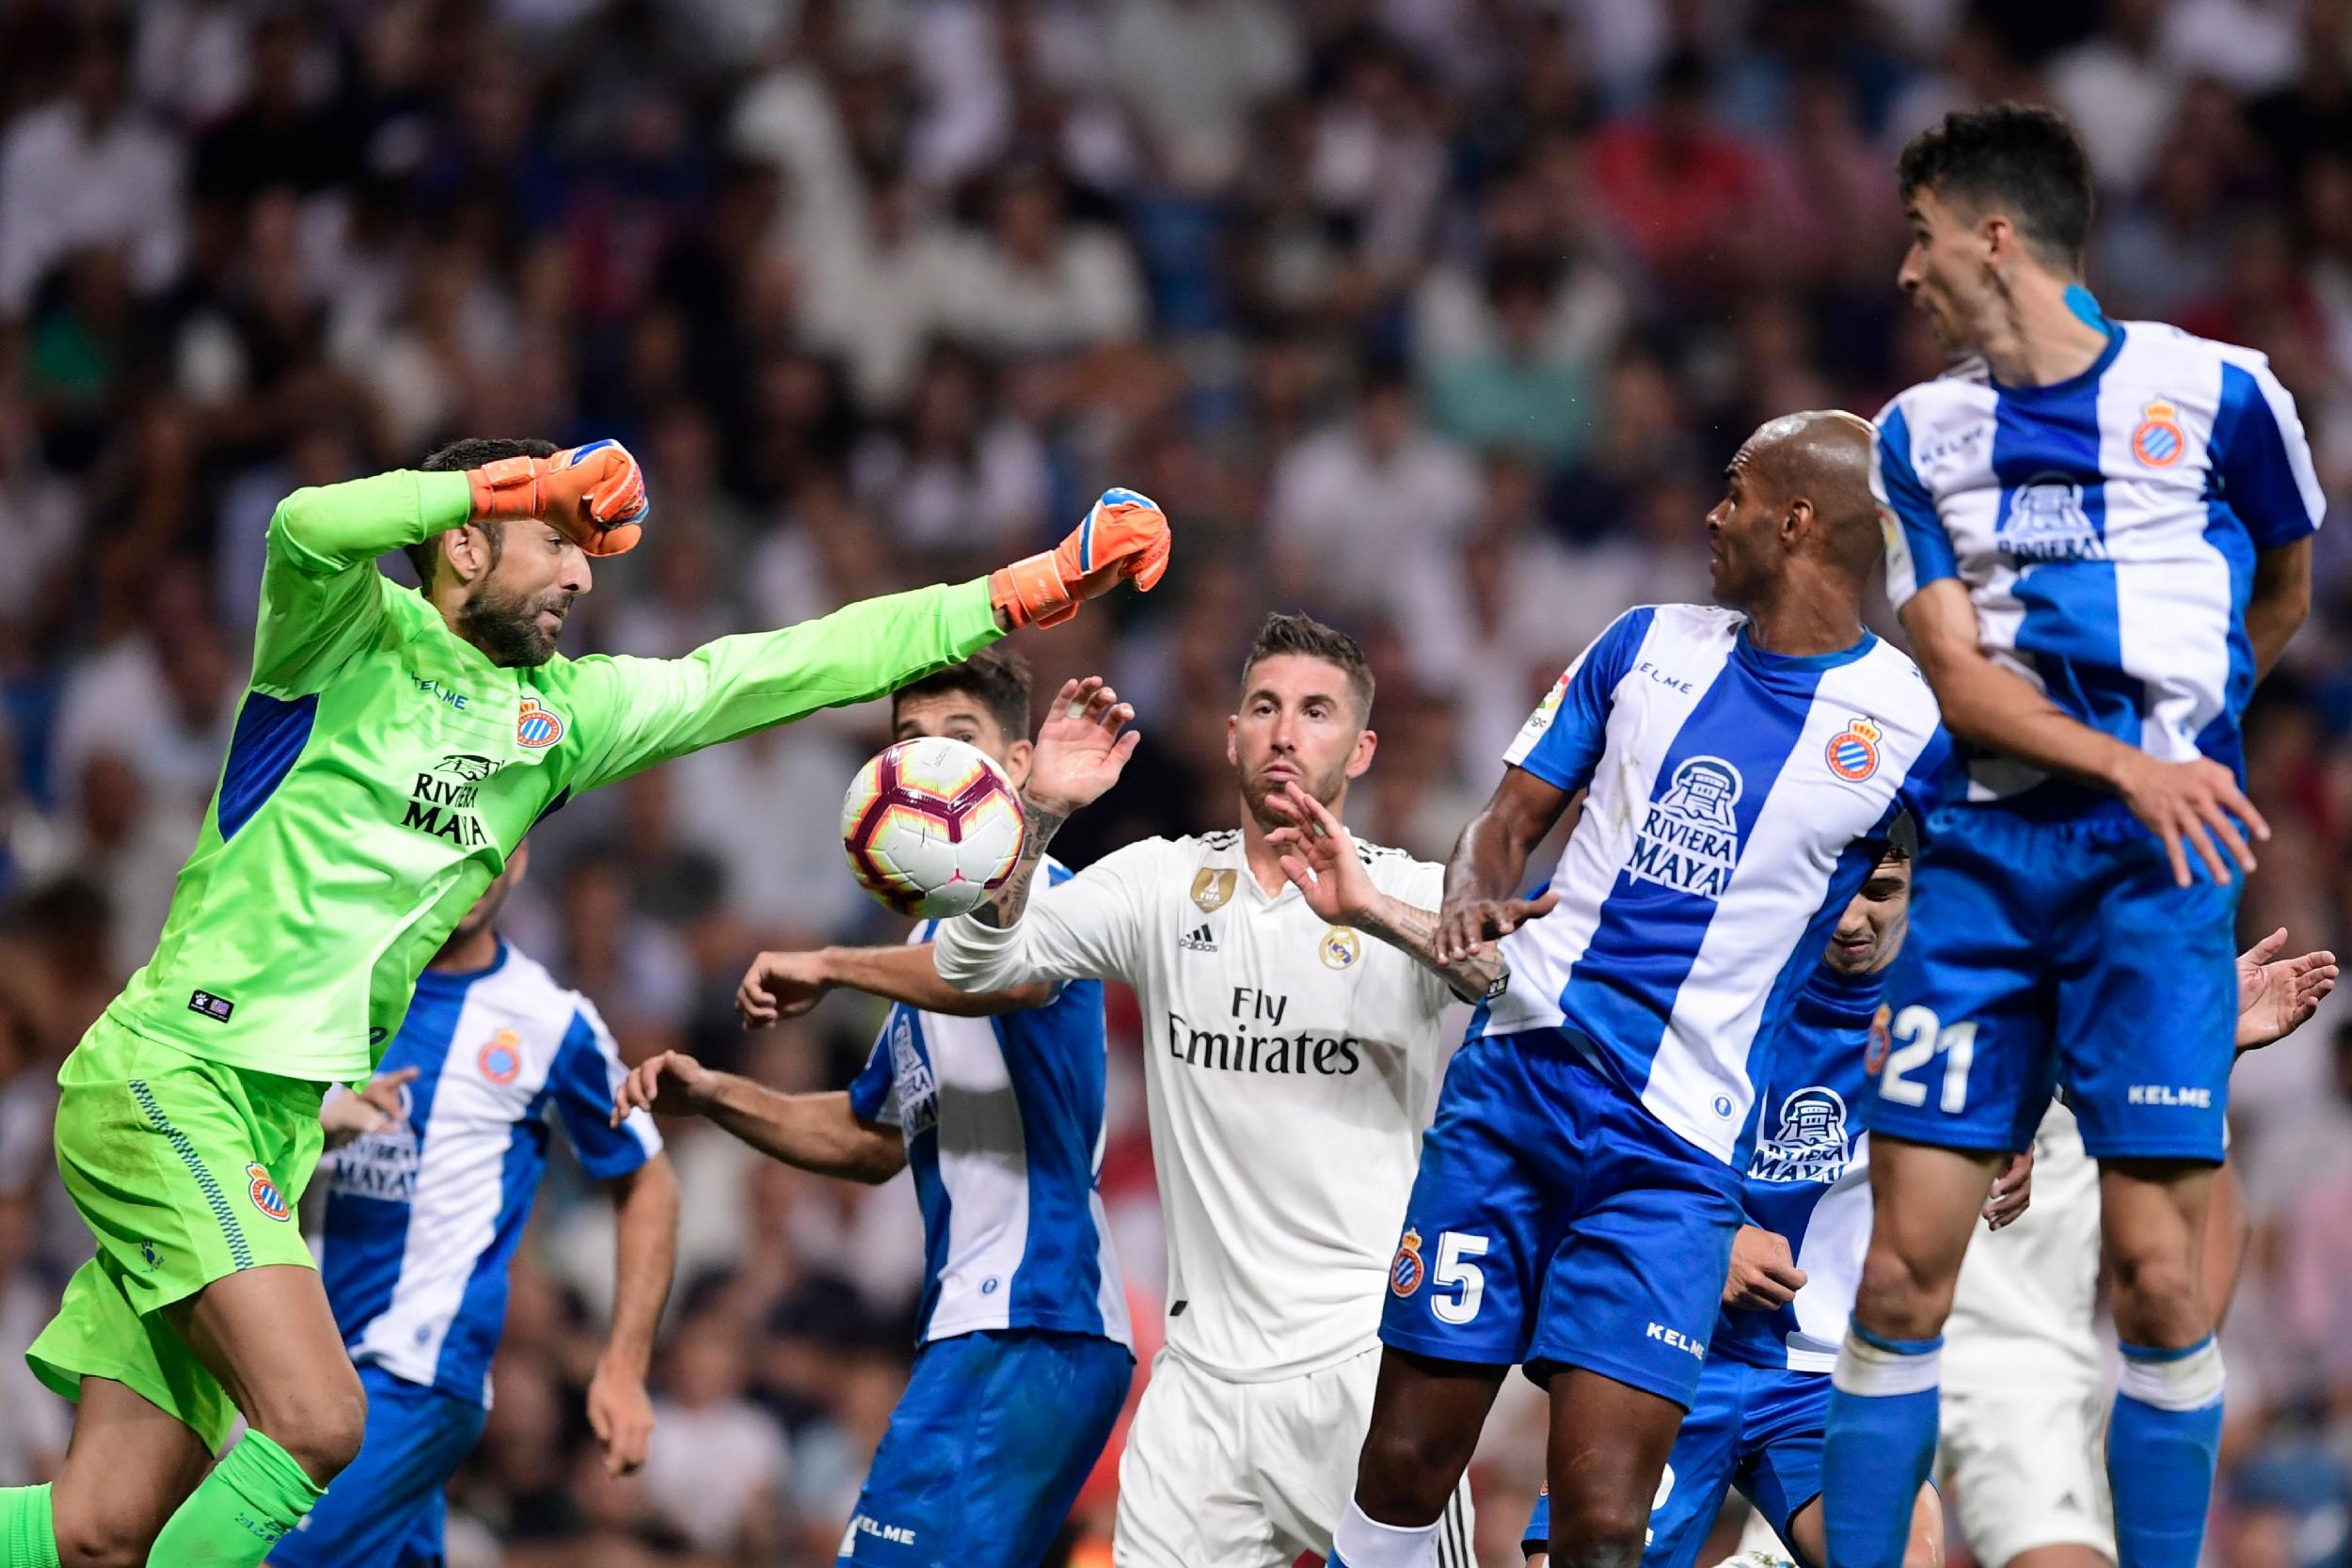 Espanyol vs Real Madrid Preview, Tips and Odds - Sportingpedia - Latest Sports News From All Over the World